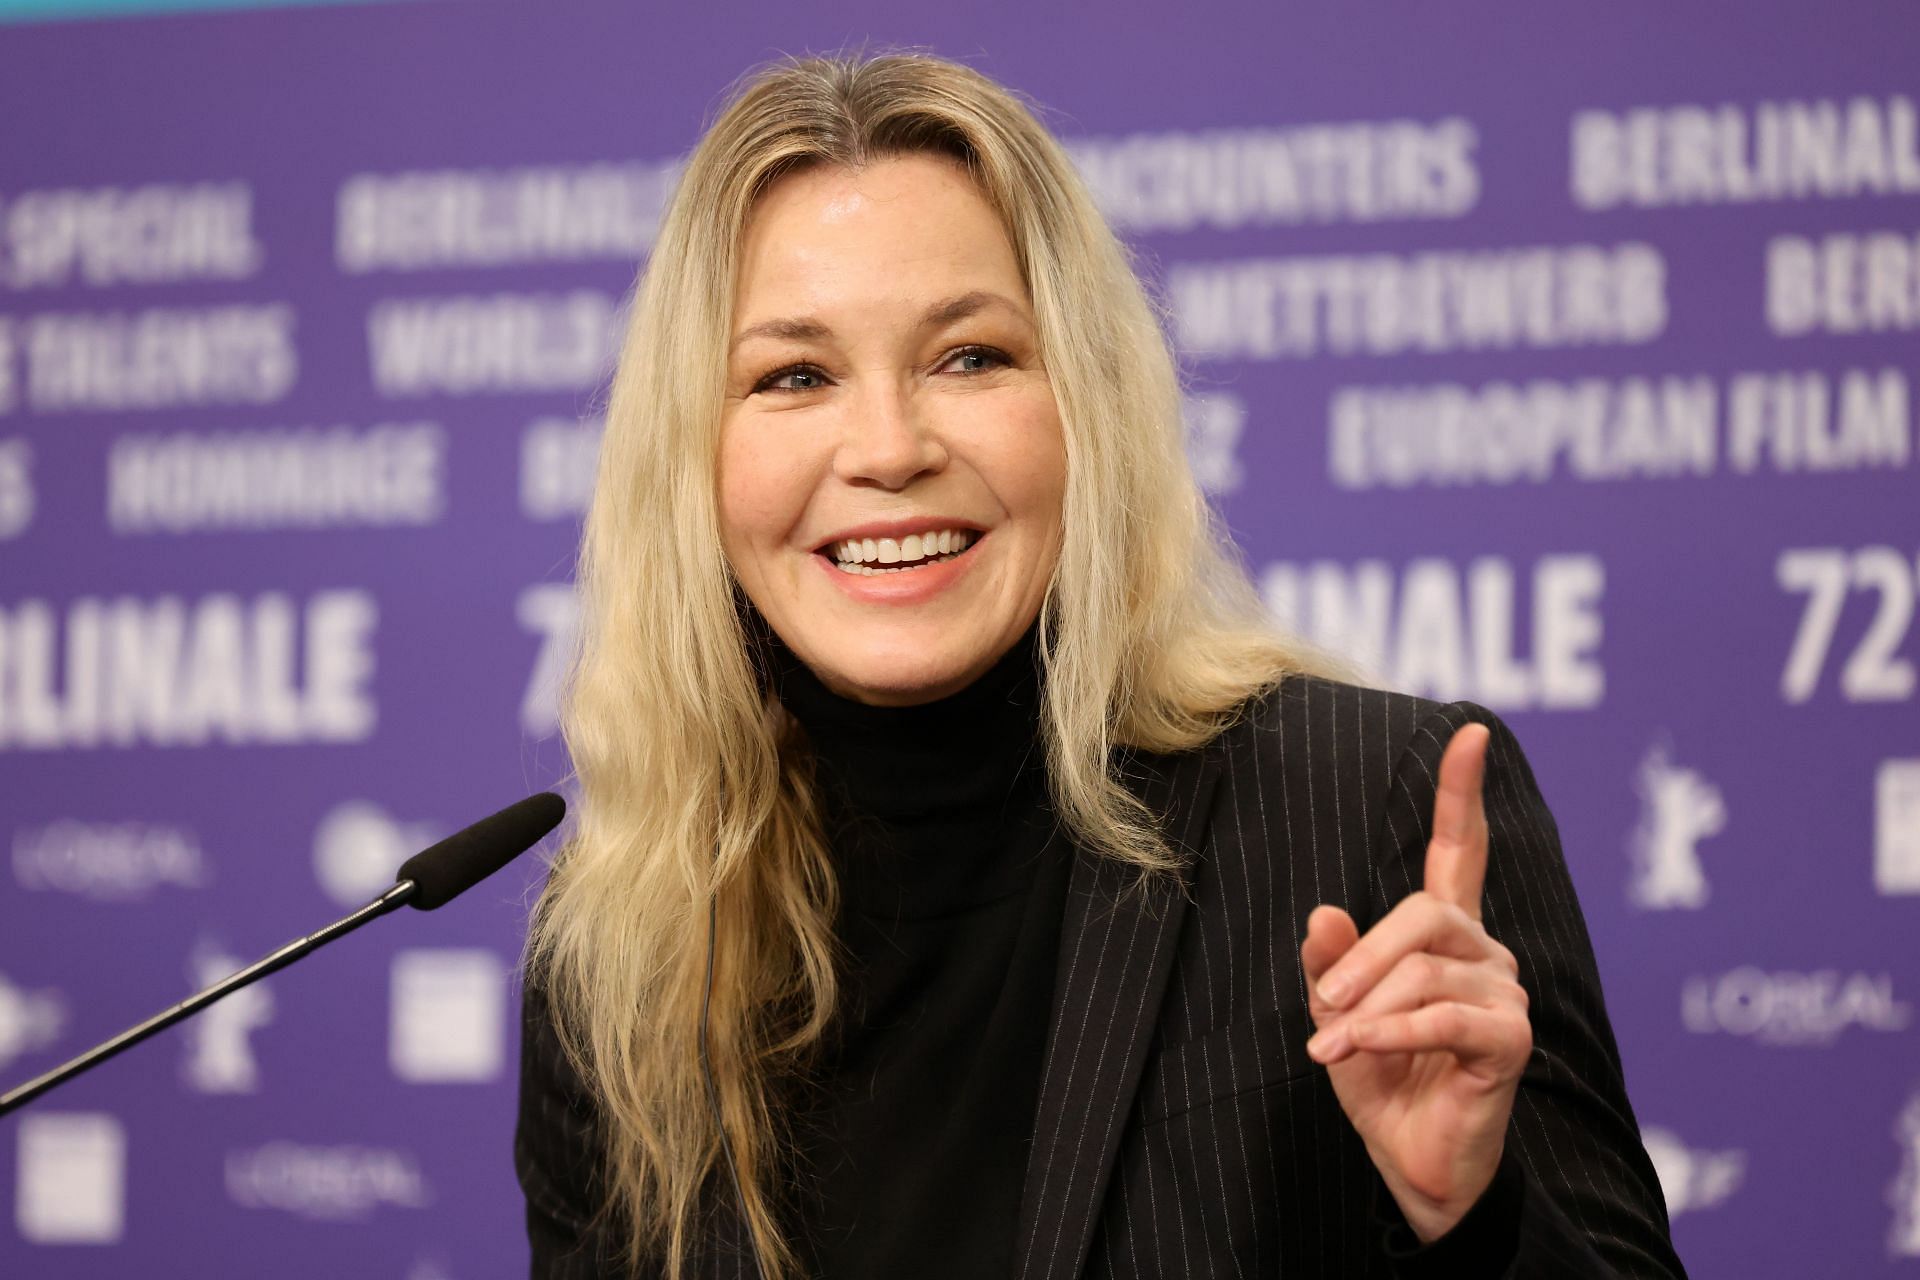 Connie Nielsen (Photo by Andreas Rentz/Getty Images)